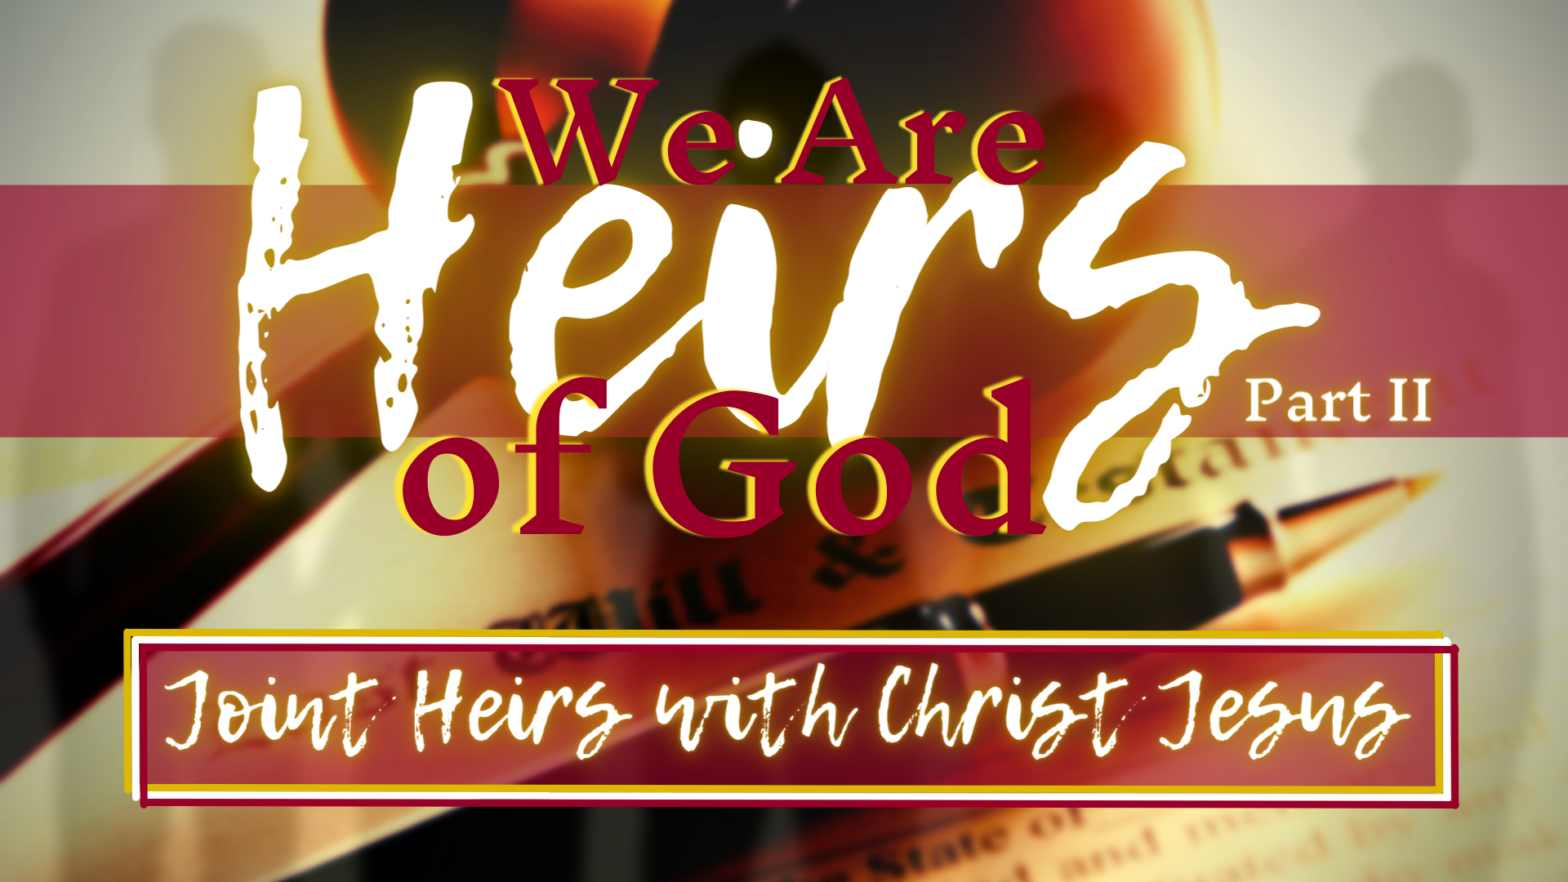 We Are Heirs with Christ Jesus